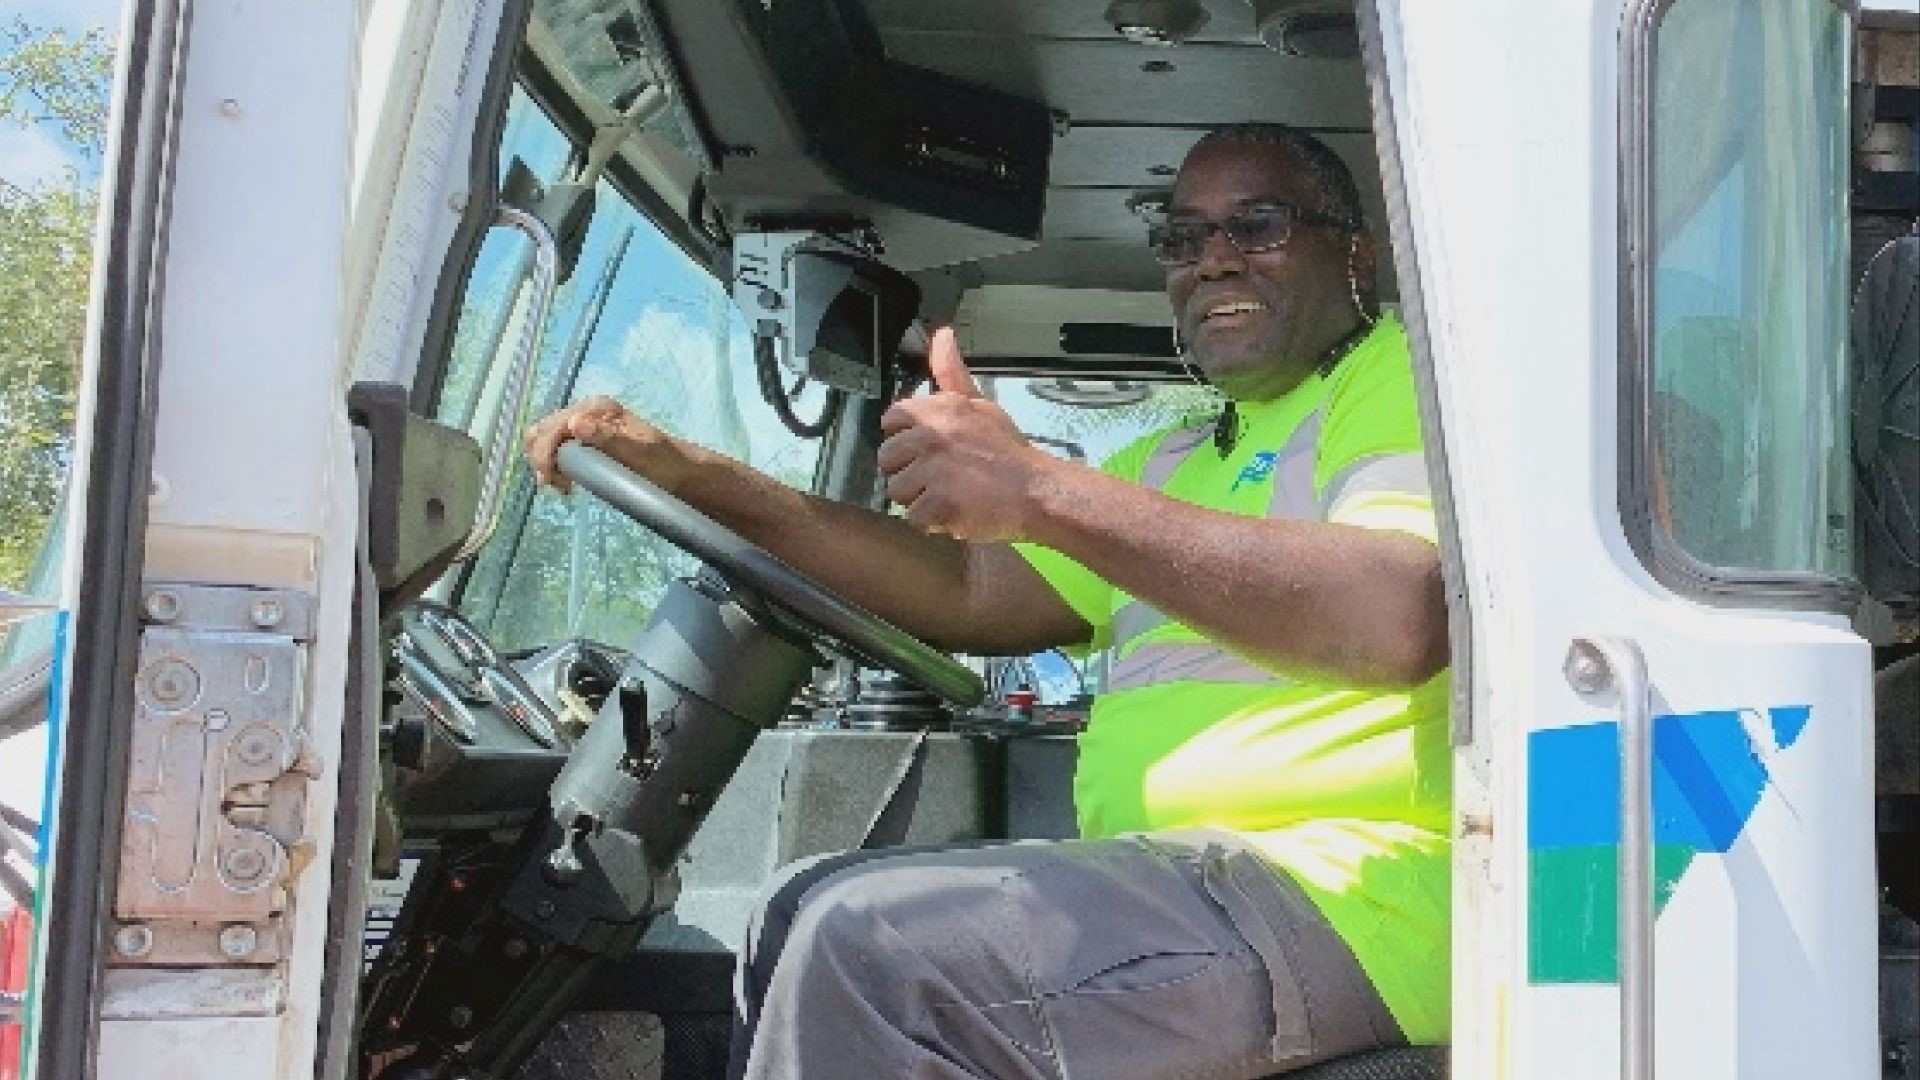 Harry Cooper III served for eight years in the U.S. Navy, through the Gulf War and in multiple countries. Now, he prides himself on the route he works in Deerwood.